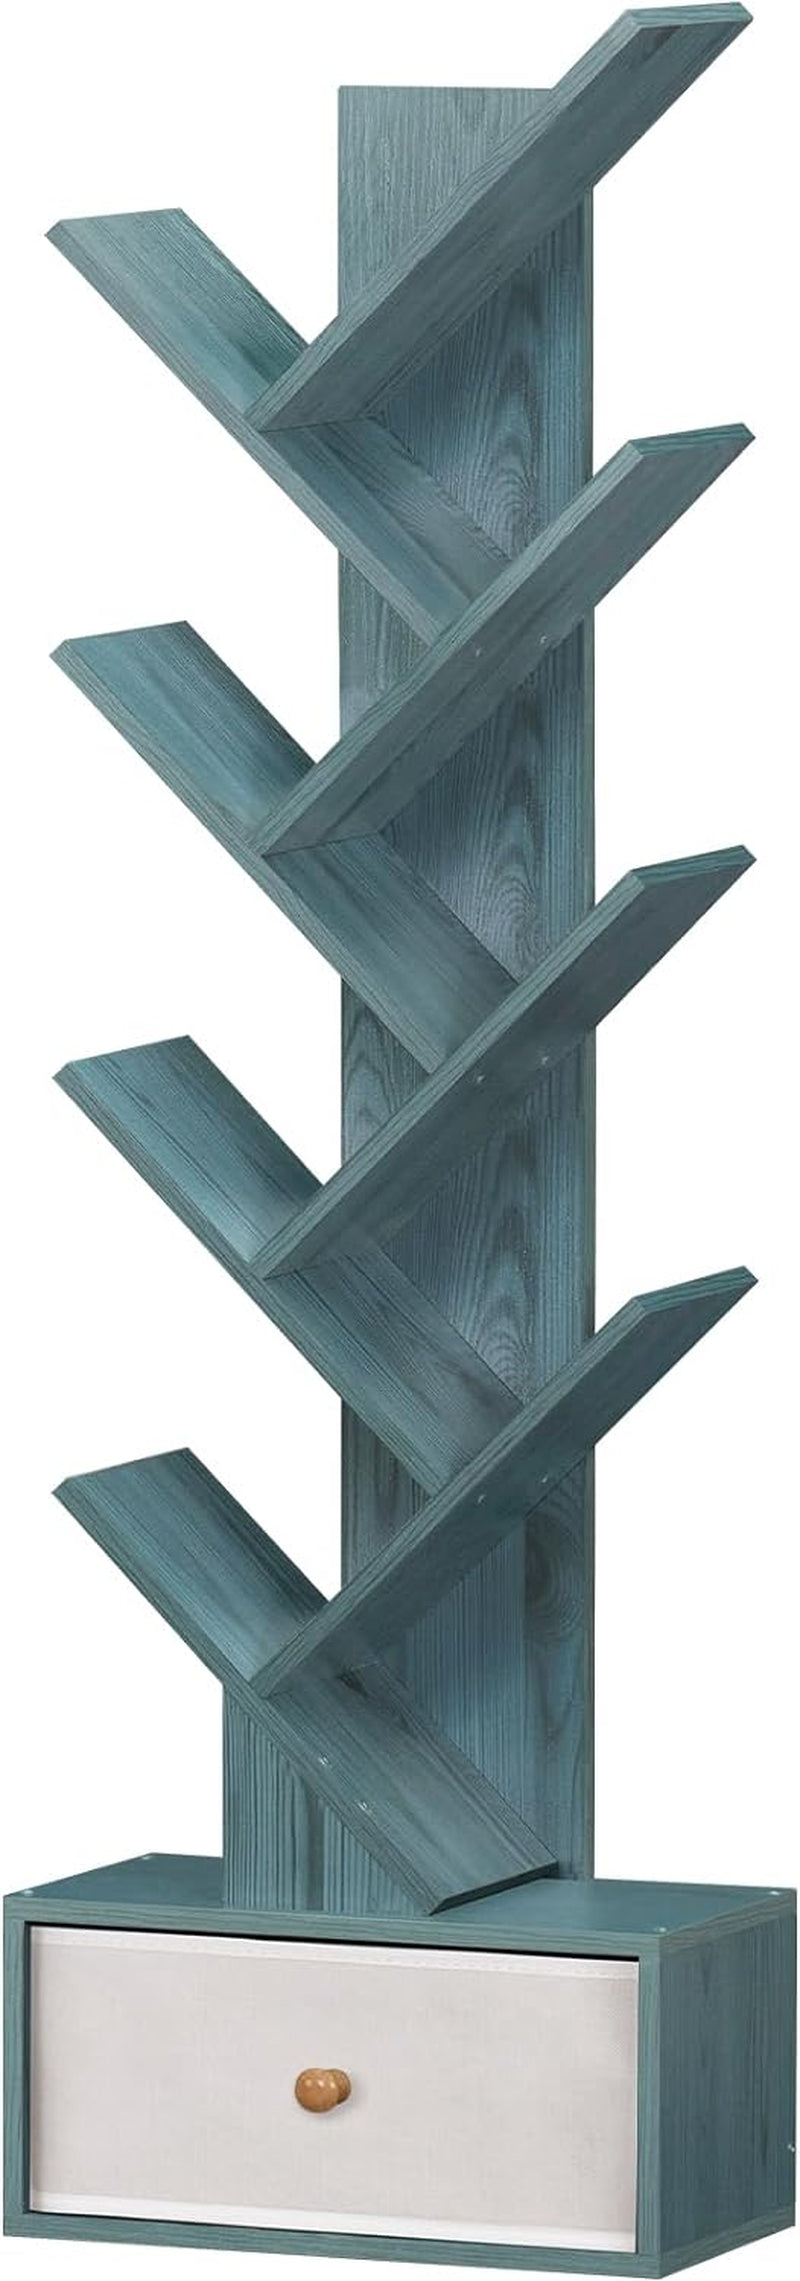 8 Tier Tree Bookshelf with Drawer, Free Standing Wood Bookcase for Living Room, Bedroom, Home Office, Space Saving Storage Organizer Bookshelves for Books, Cds, Vinyl Records- Black